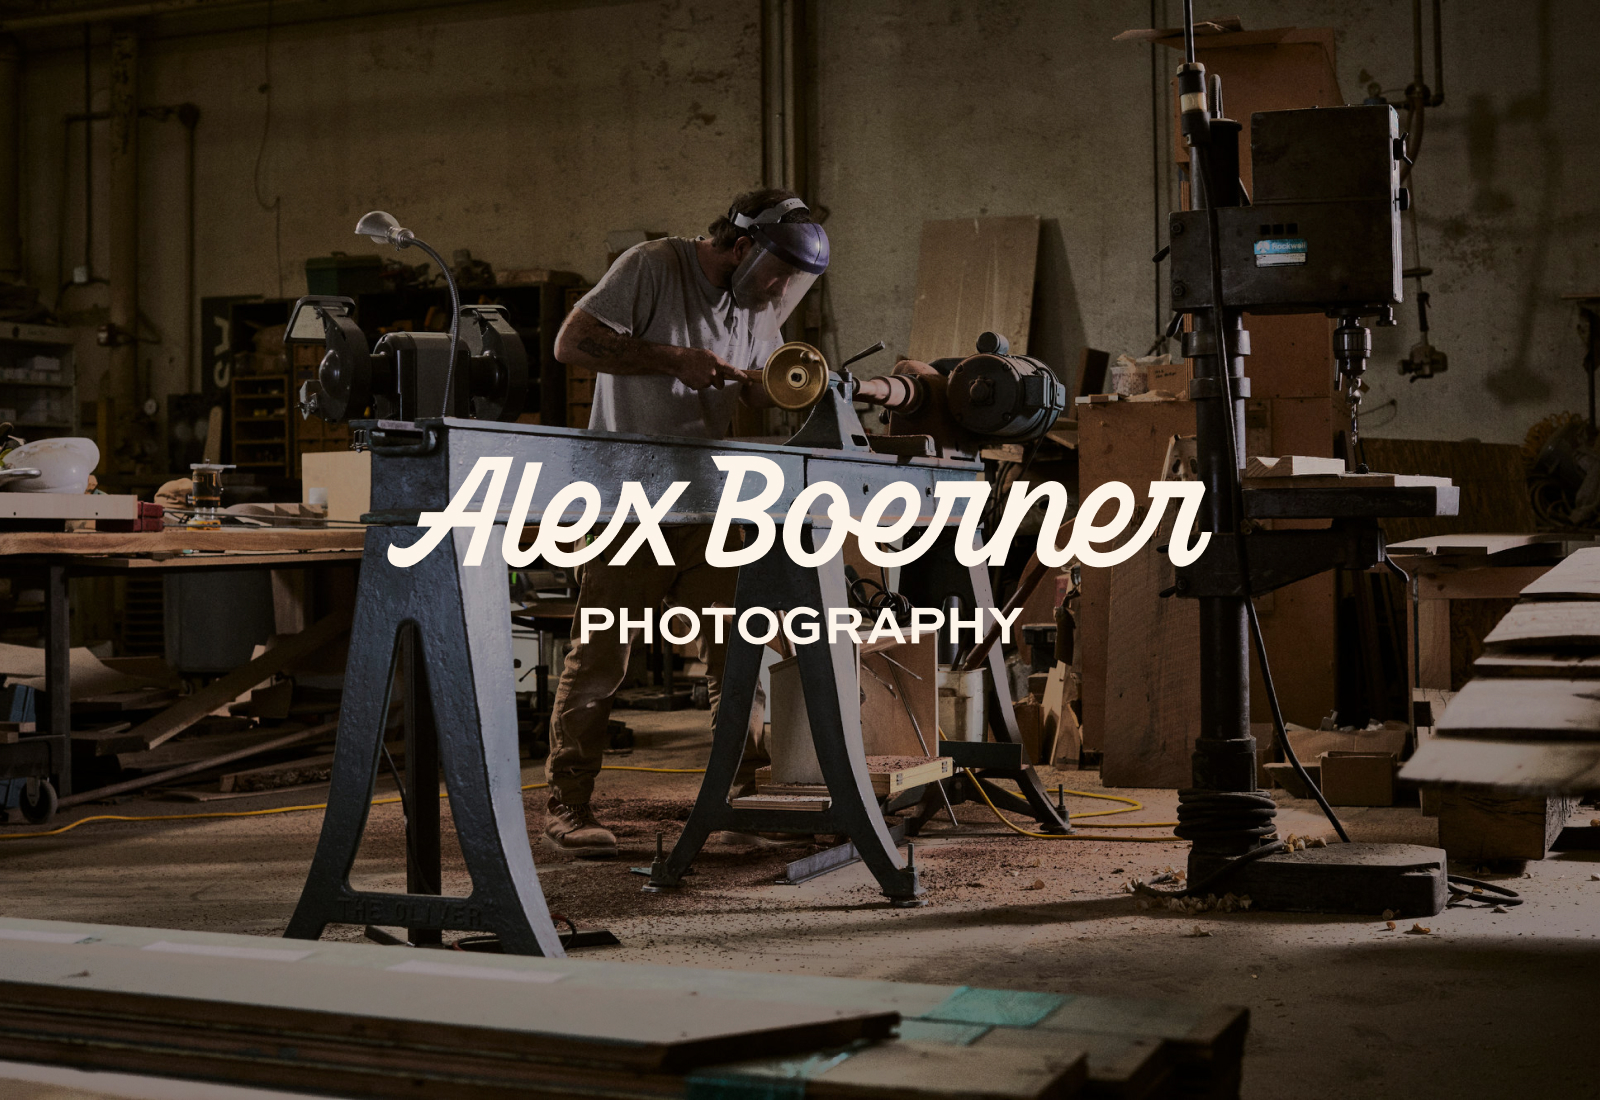 Logo overlaid on top of a photograph of Raleigh Reclaimed Alex Boerner Photography | Custom Lettered Logotype